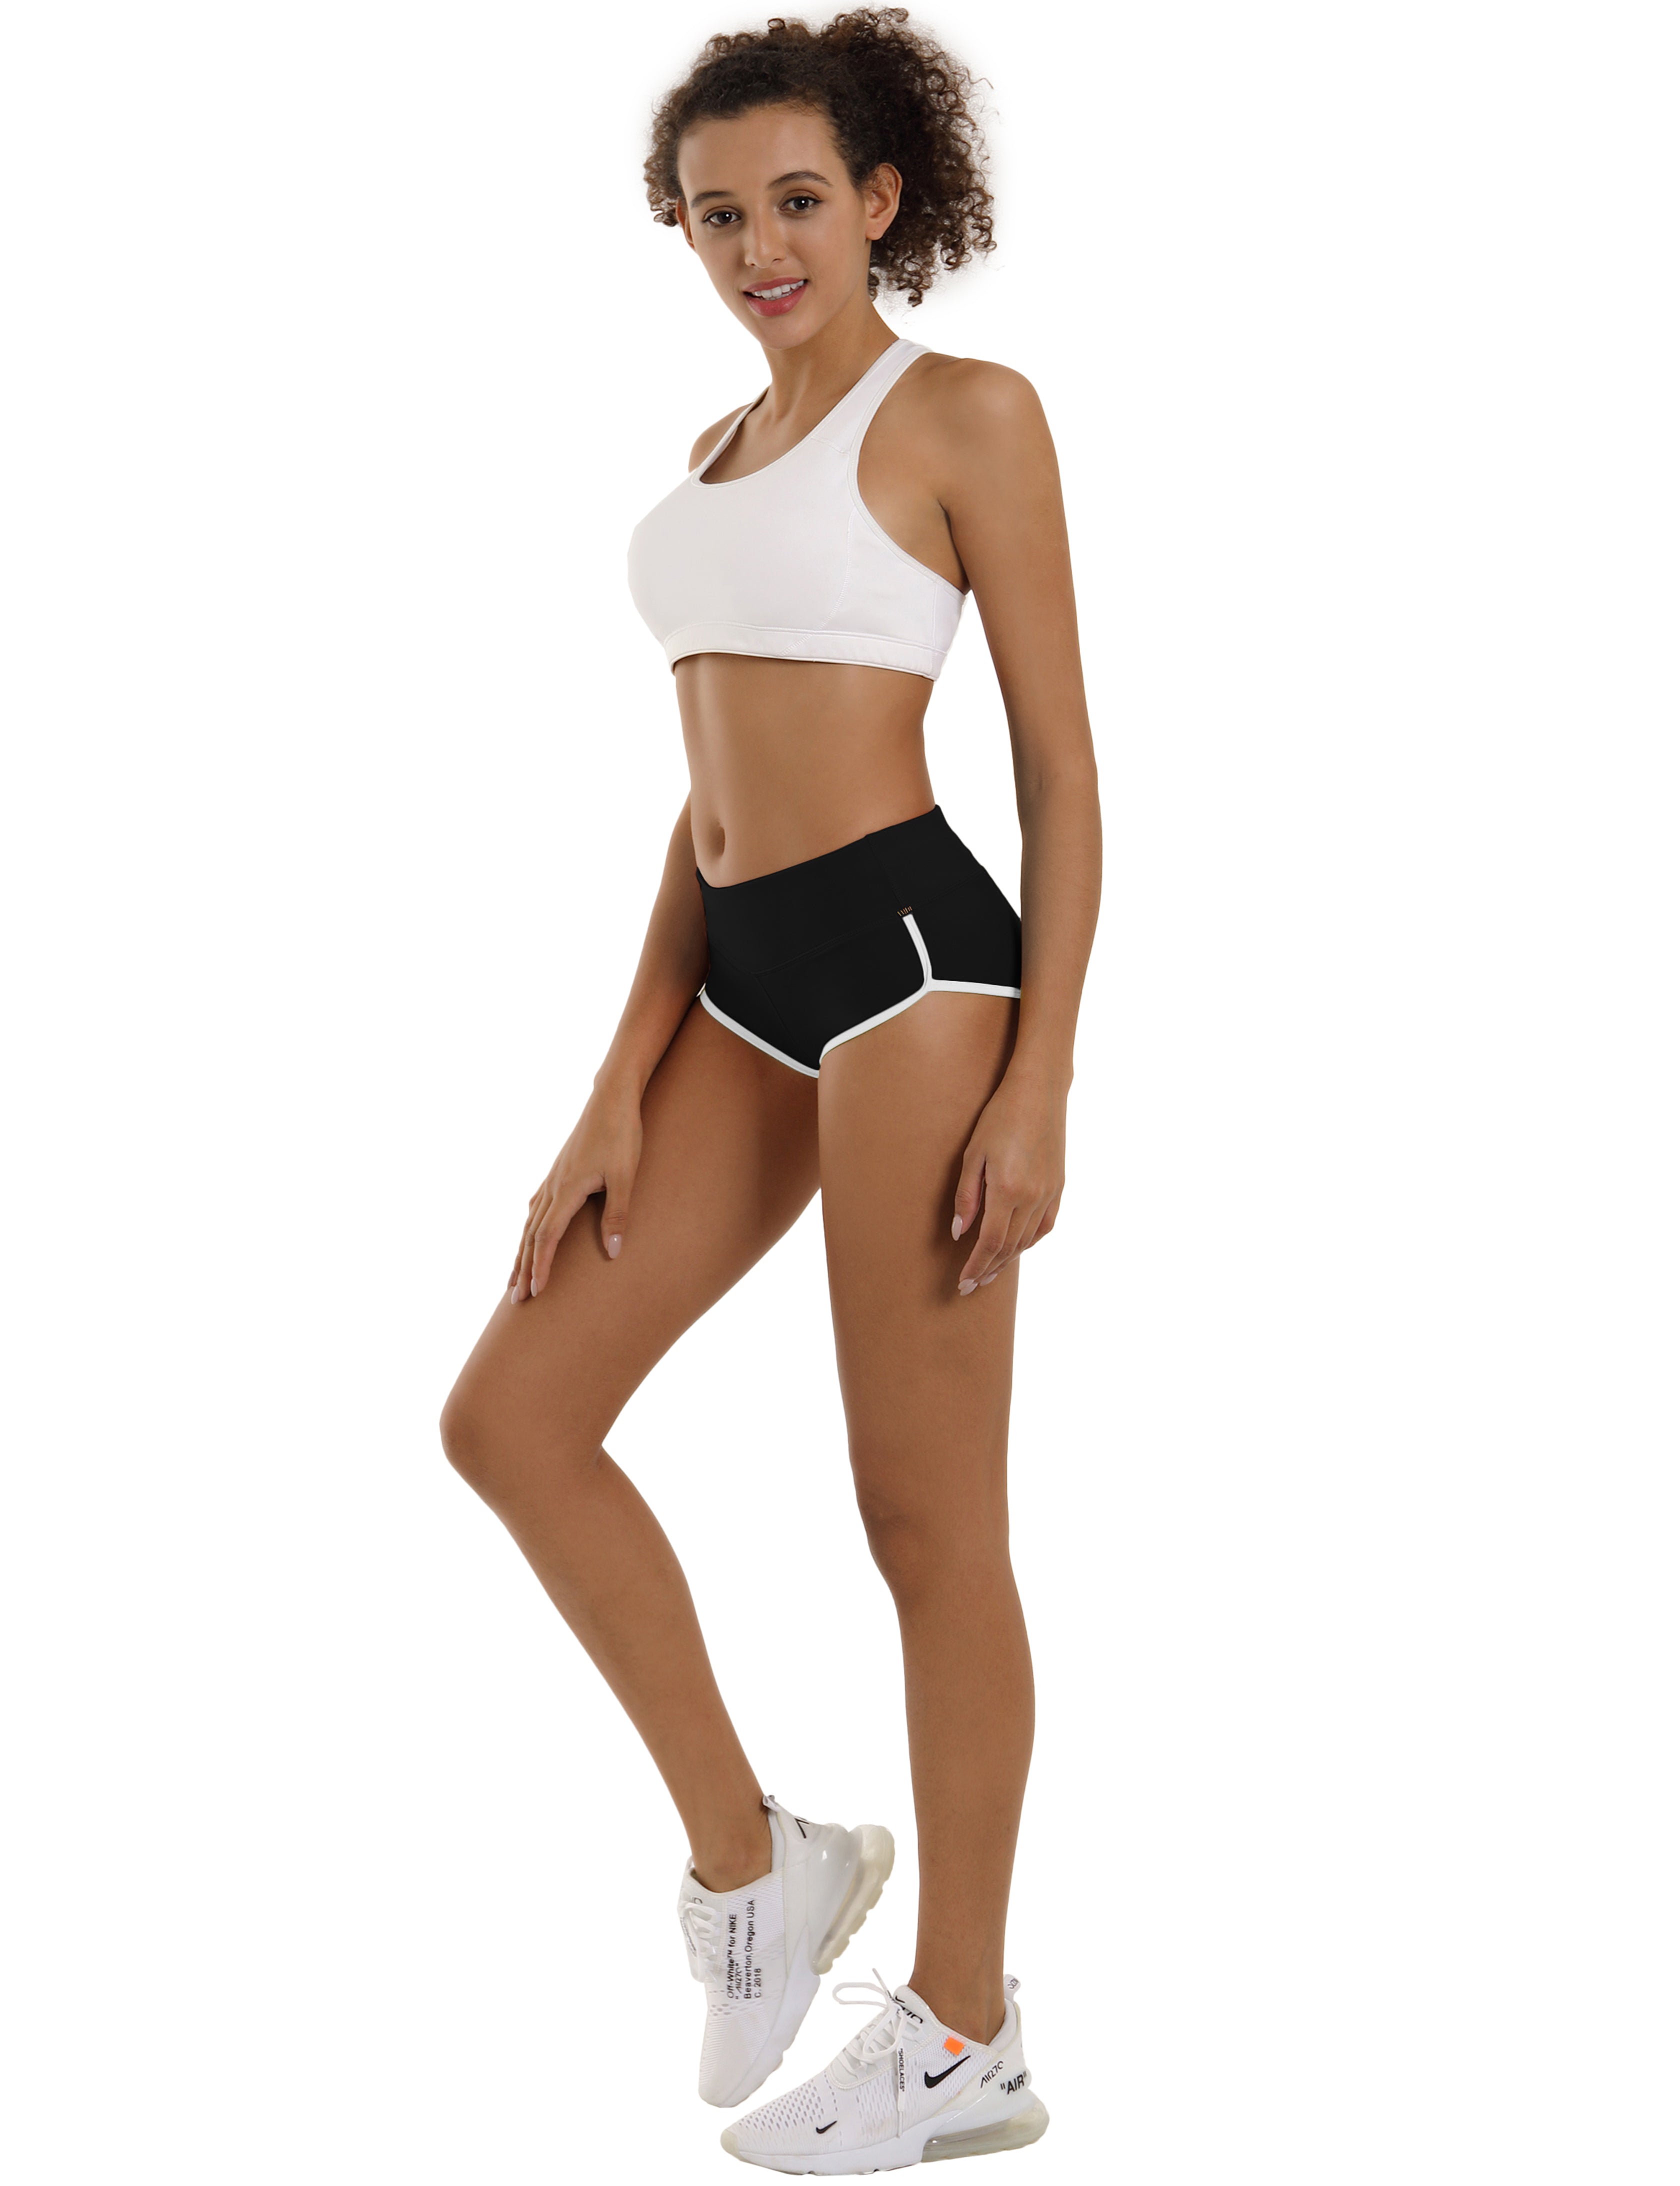 Sexy Booty Jogging Shorts black Sleek, soft, smooth and totally comfortable: our newest sexy style is here. Softest-ever fabric High elasticity High density 4-way stretch Fabric doesn't attract lint easily No see-through Moisture-wicking Machine wash 75%Nylon/25%Spandex